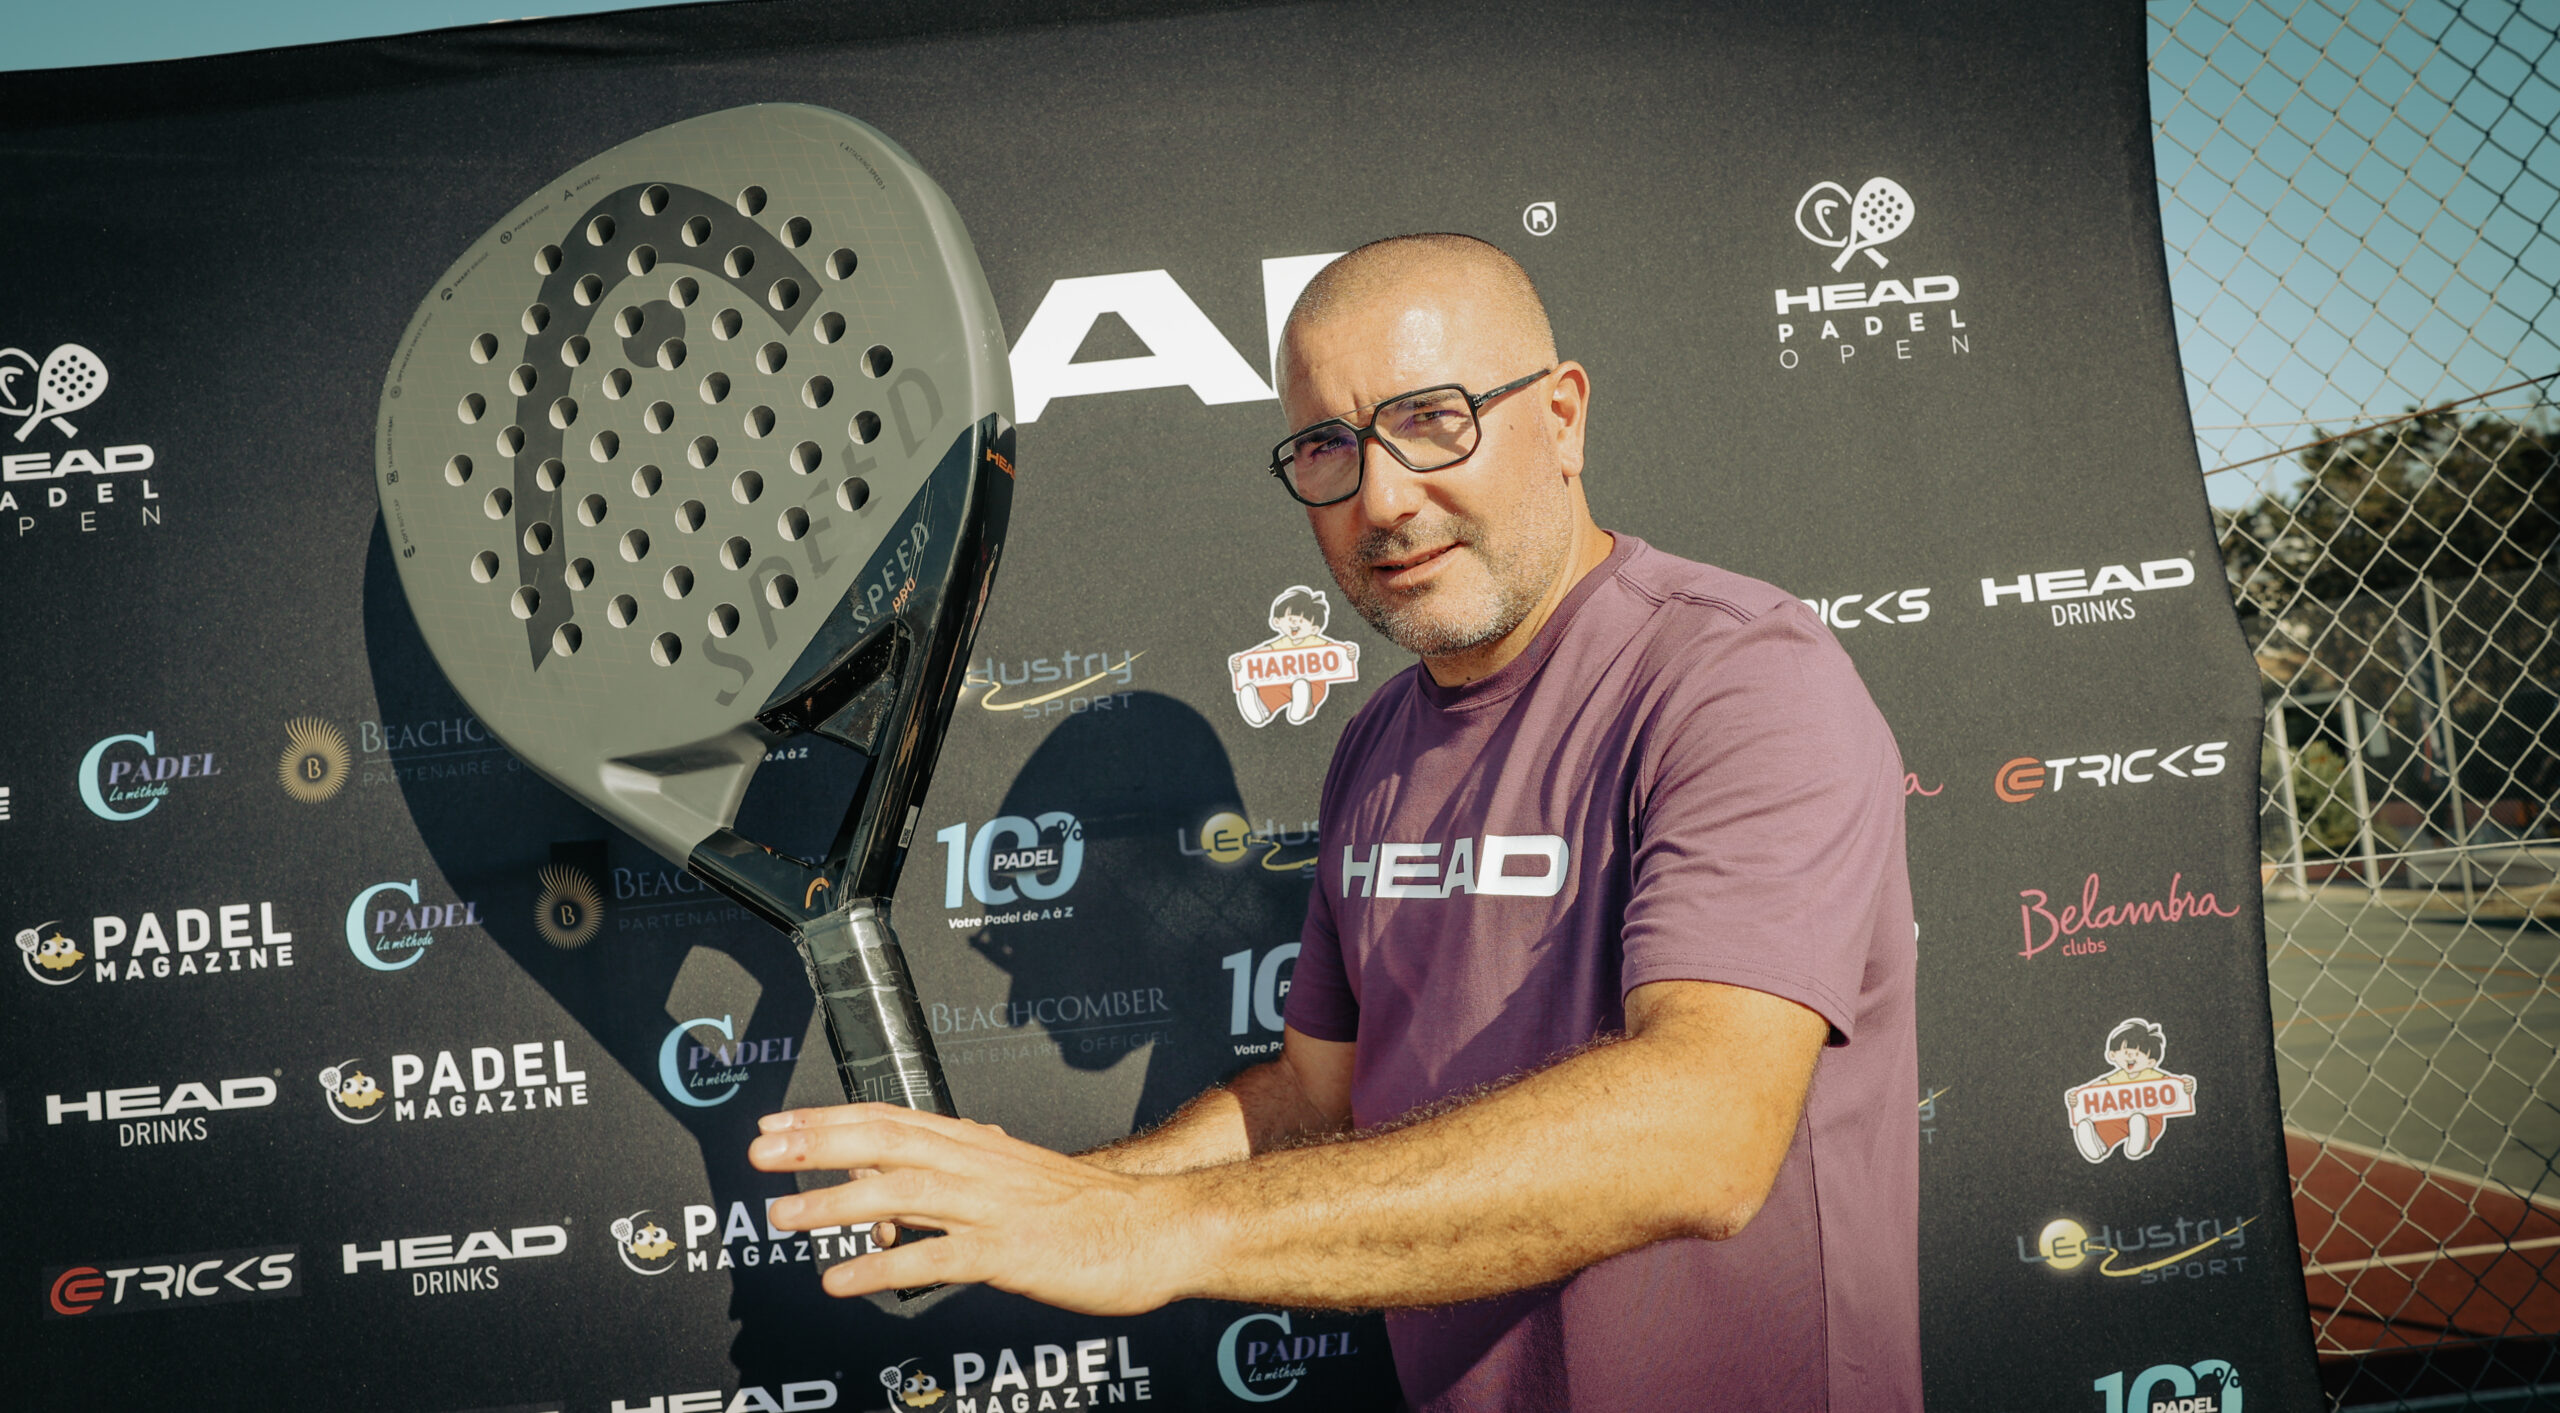 Pierre-Etienne Morillon – The padel in France: challenges and opportunities